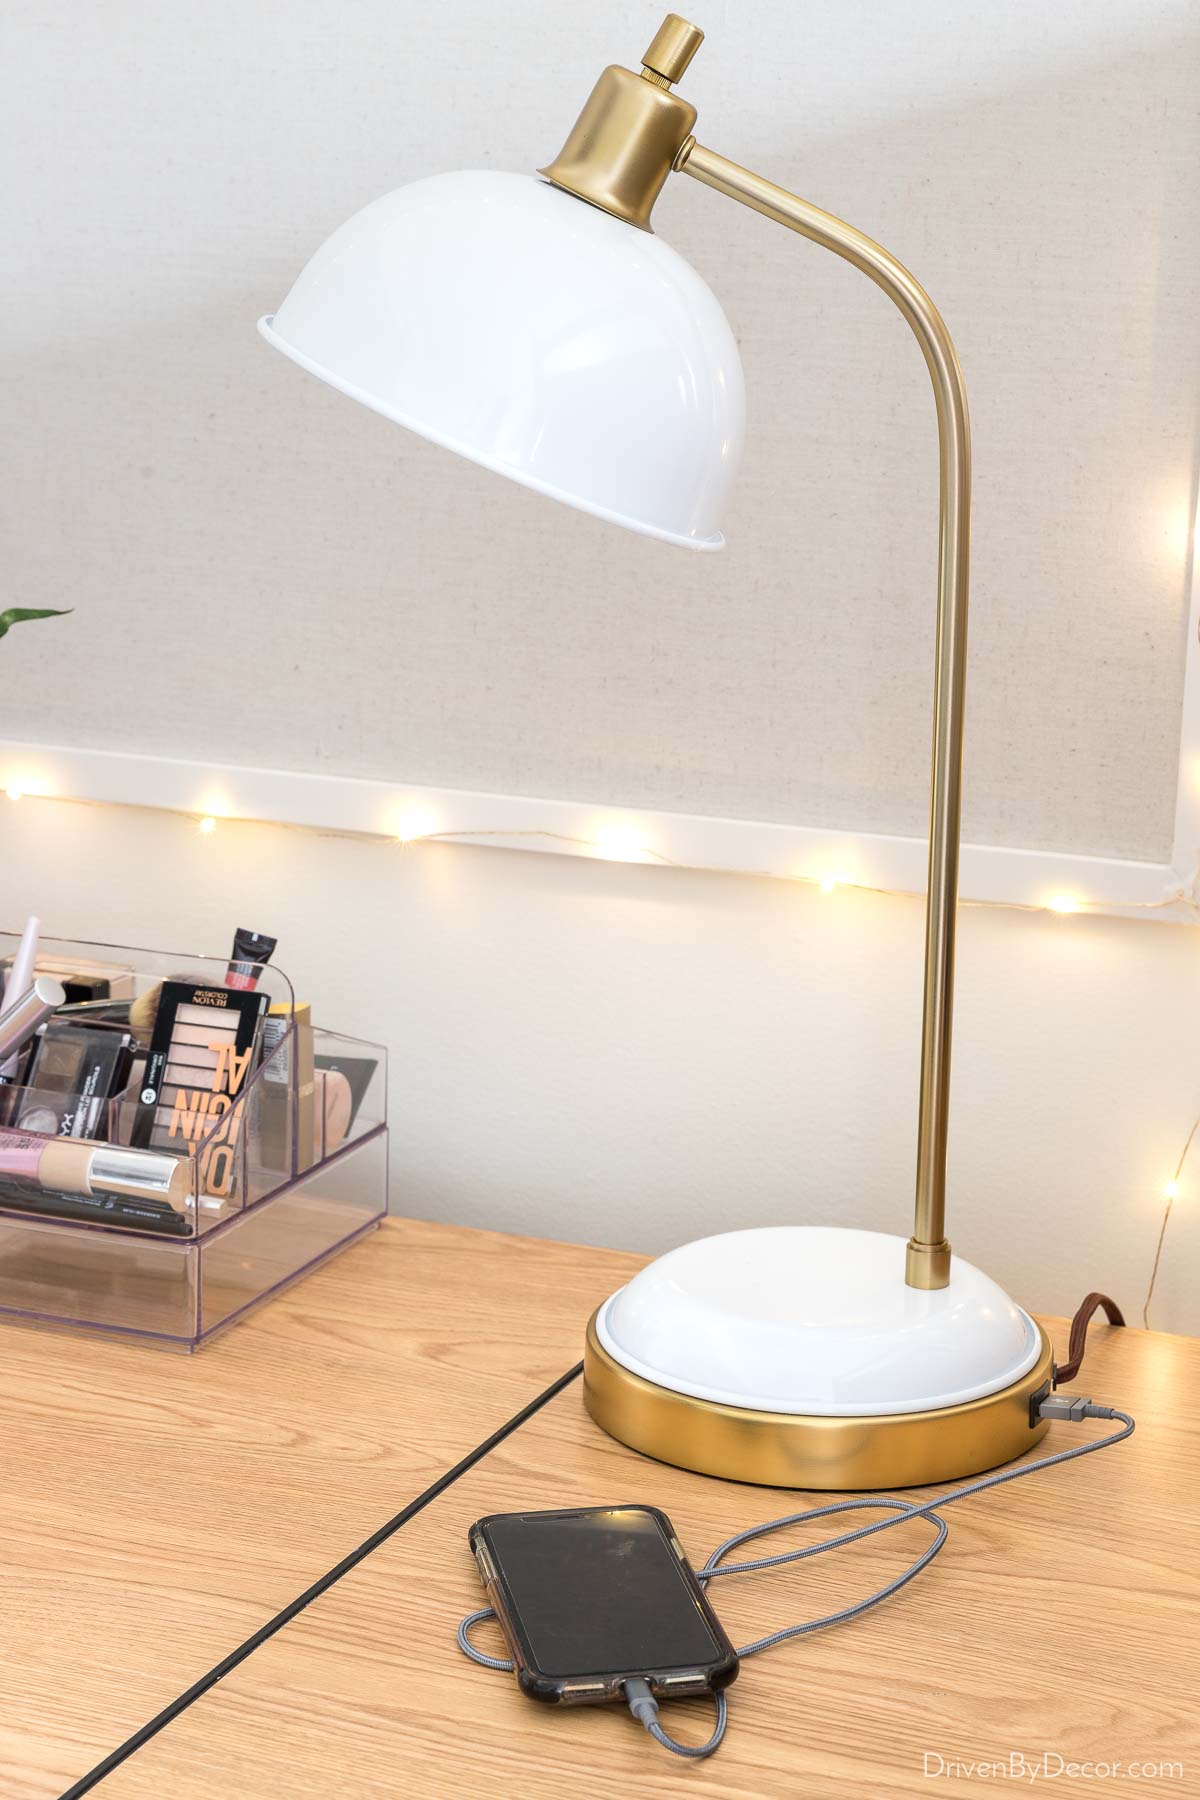 A USB desk lamp like this is great to add to your college packing list!